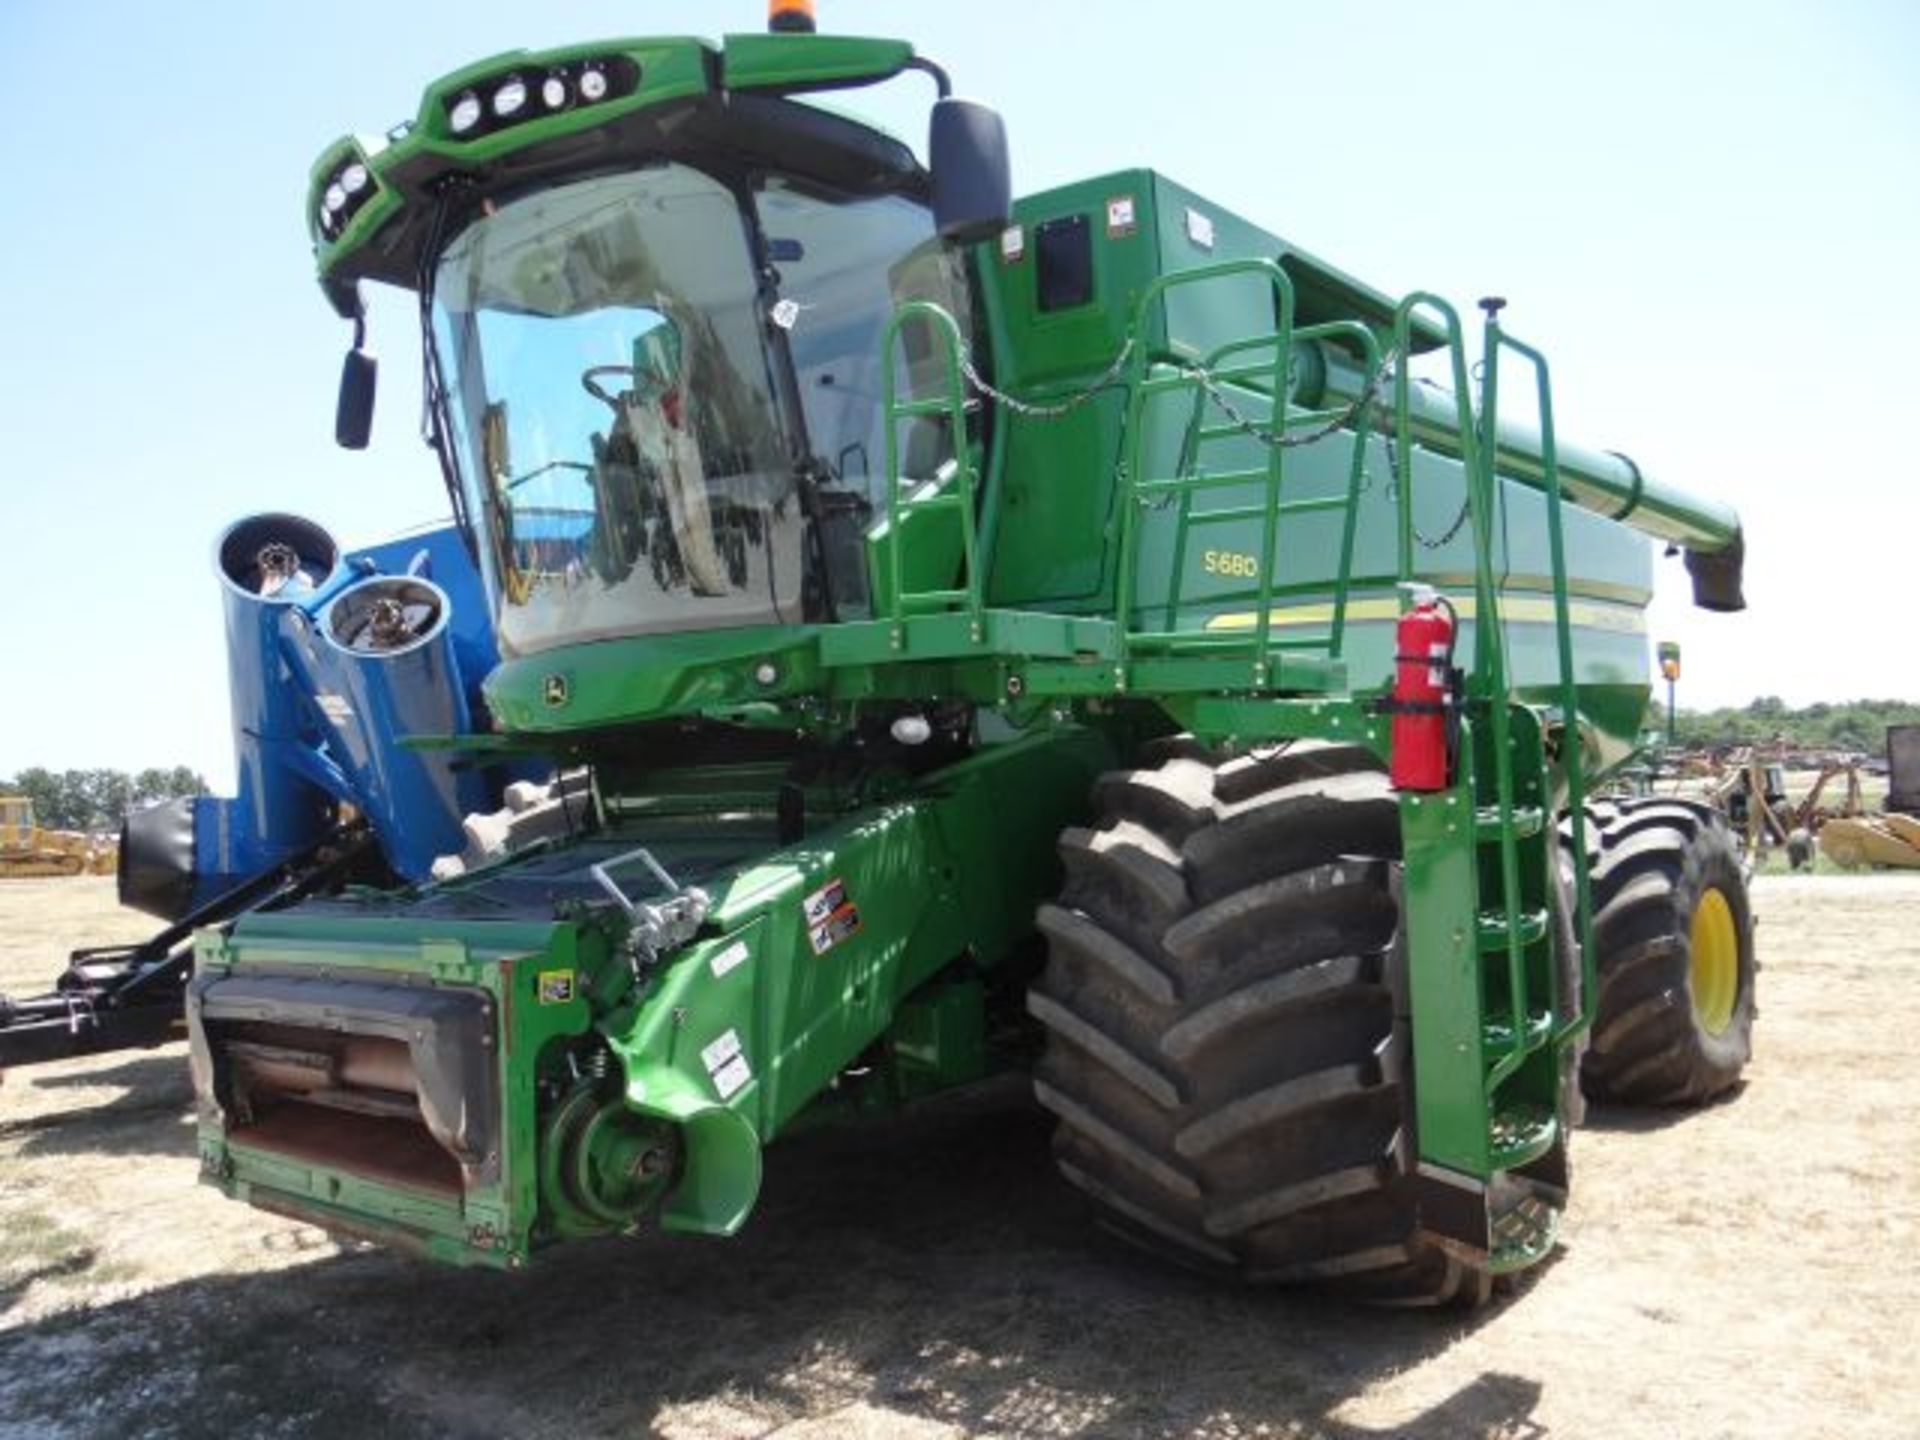 JD S680 Combine, 2012 #150819, 1299/956 hrs, PRWD, CM, Yield Monitor, Yield Mapping, Long